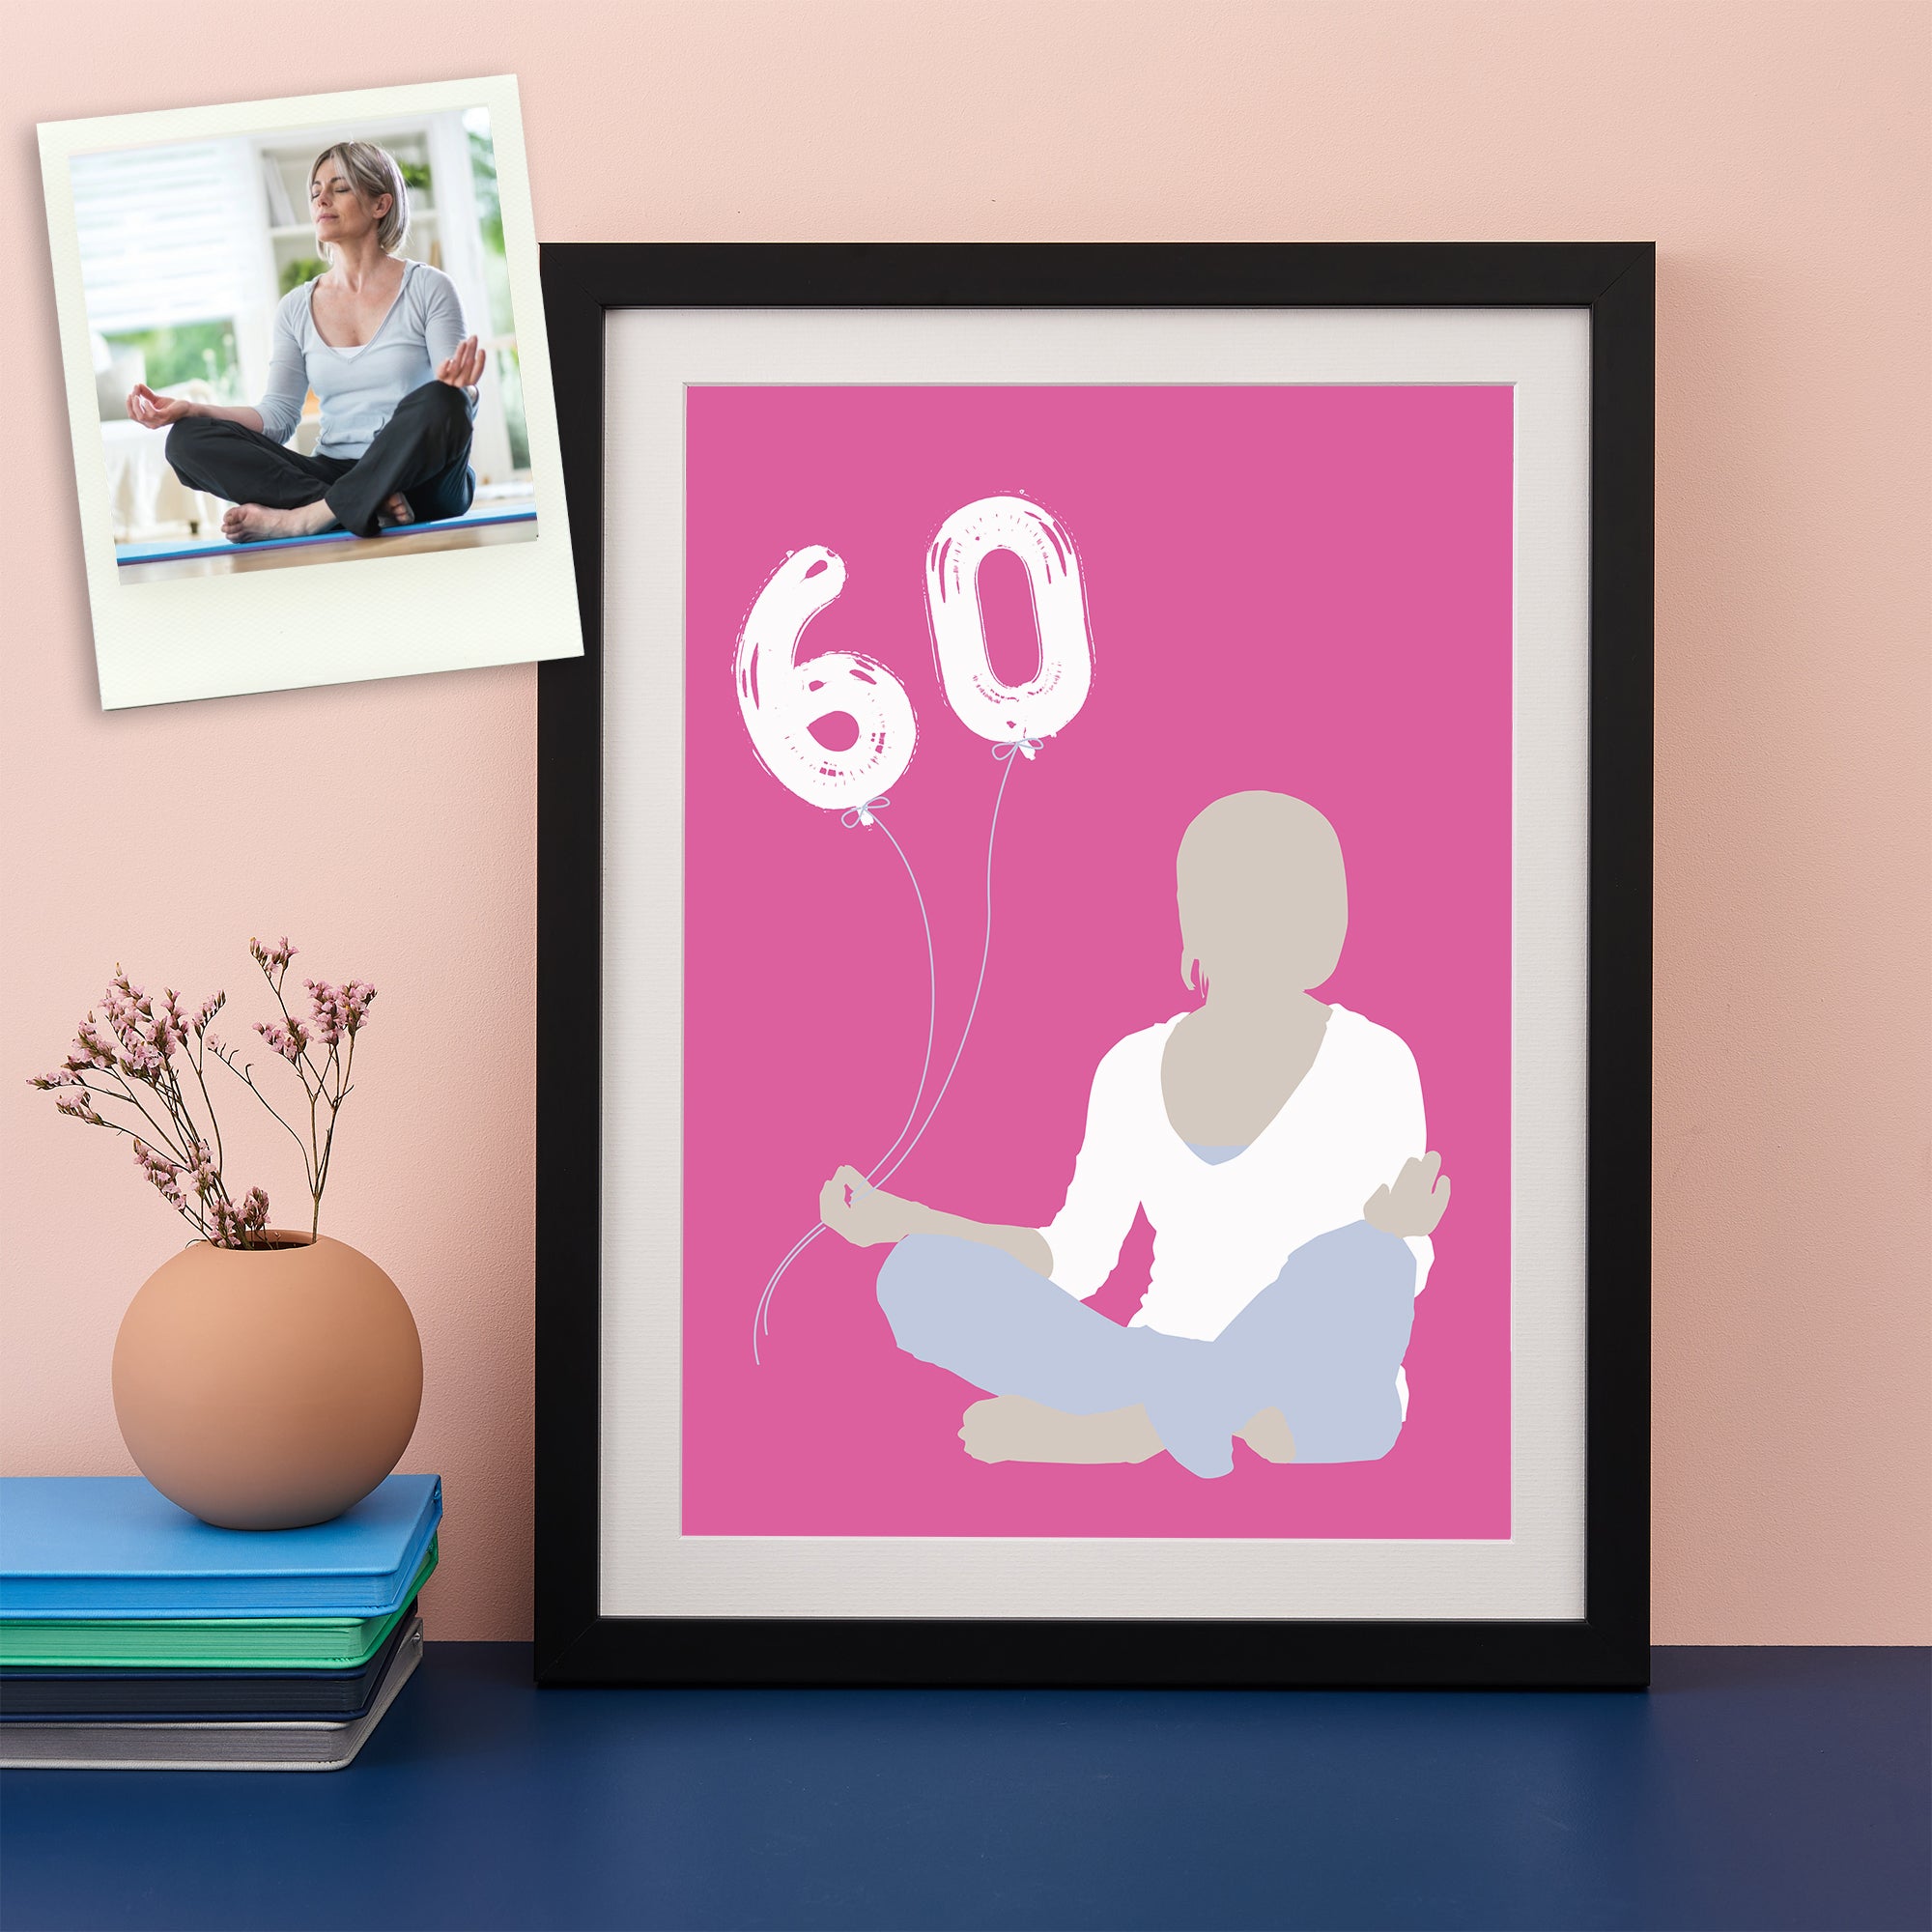 Colour pop modern silhouette image of a man sitting on a chair holding balloons saying 60